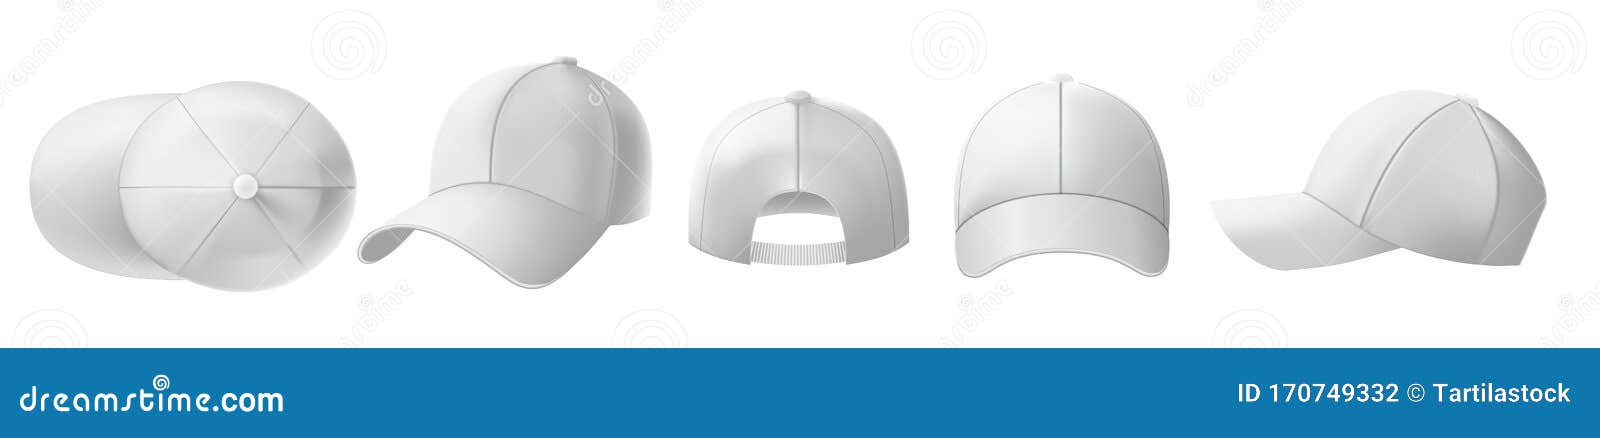 white cap mockup. sports visor hat template, baseball cap front and back view realistic 3d   set